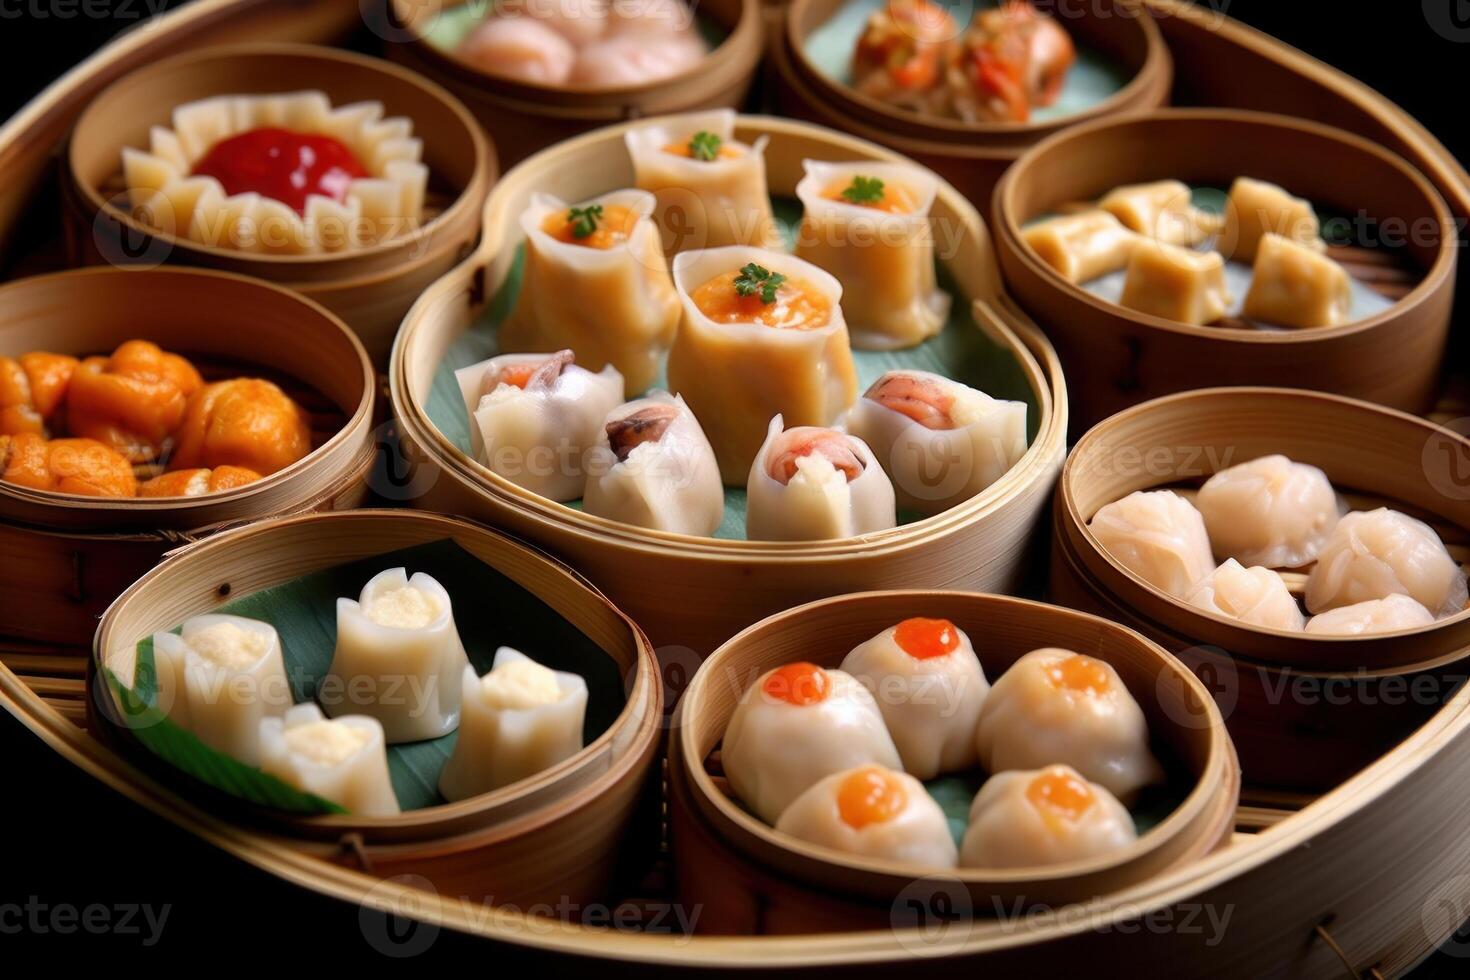 stock photo of Dim sum or dinxin is one of the most popular Cantonese food photography